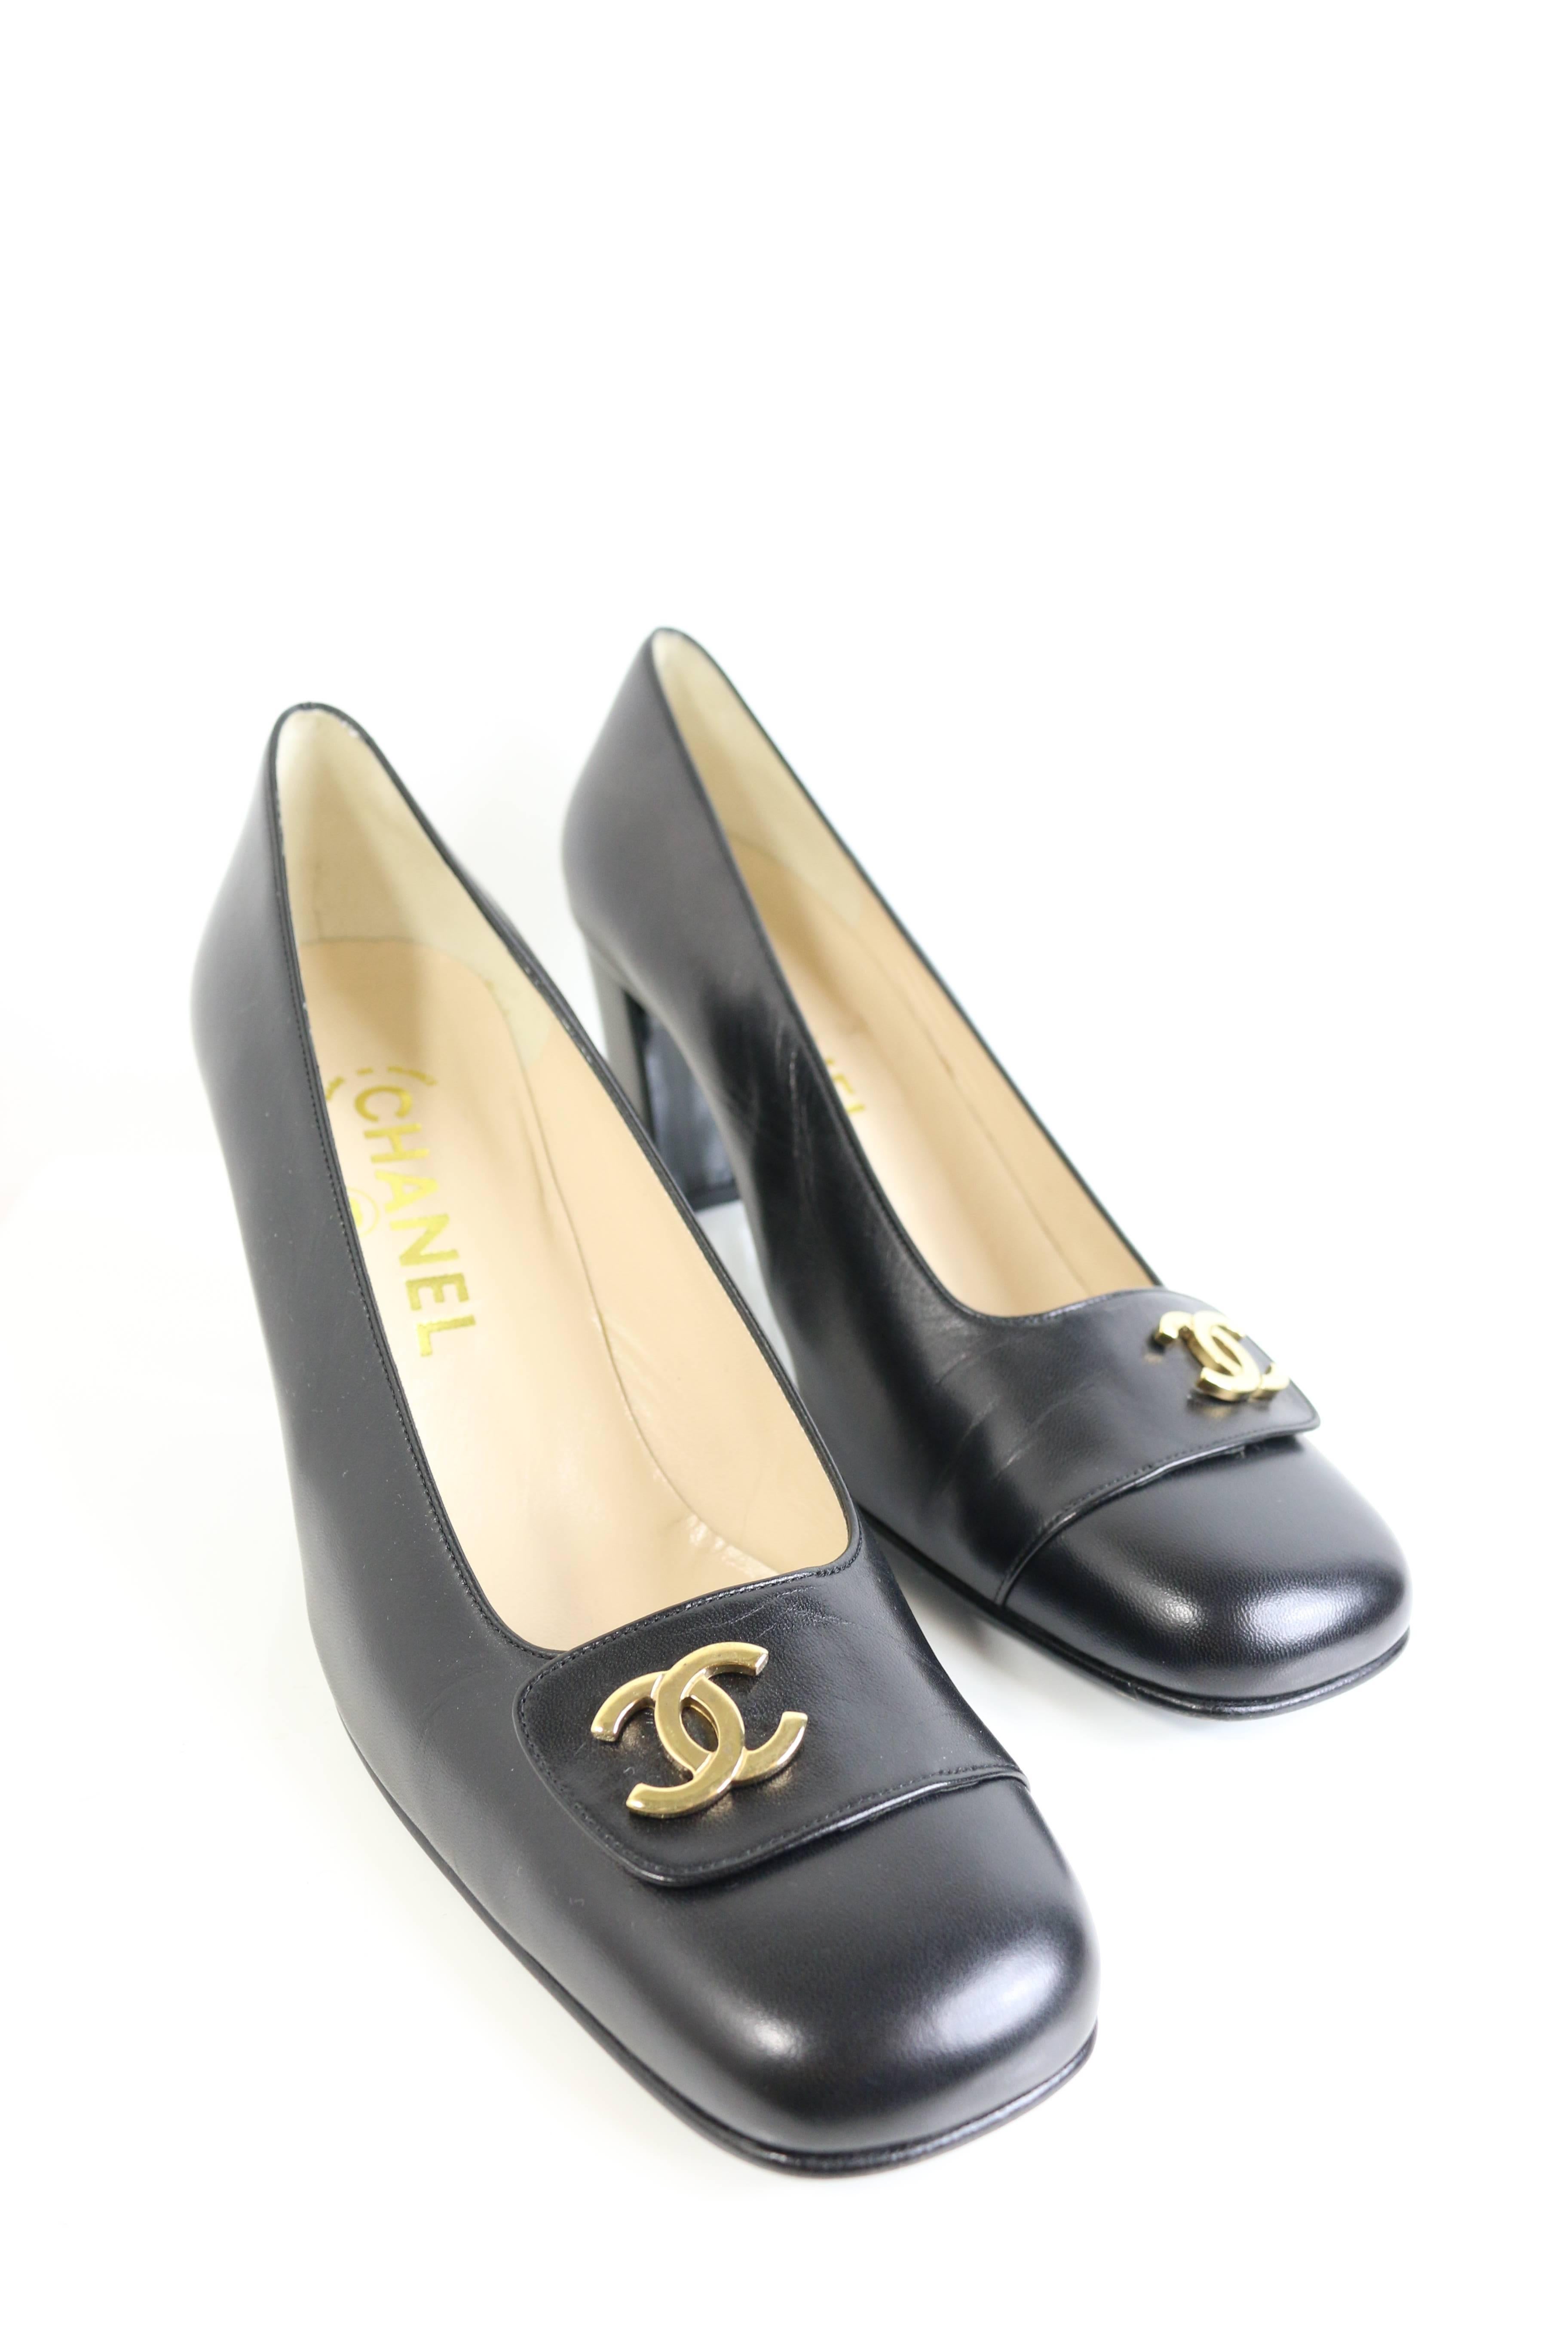 - Vintage 90s Chanel classic and timeless black leather "CC" logo square toe heels. 

- Size 38.5. 

- Made in Italy 

